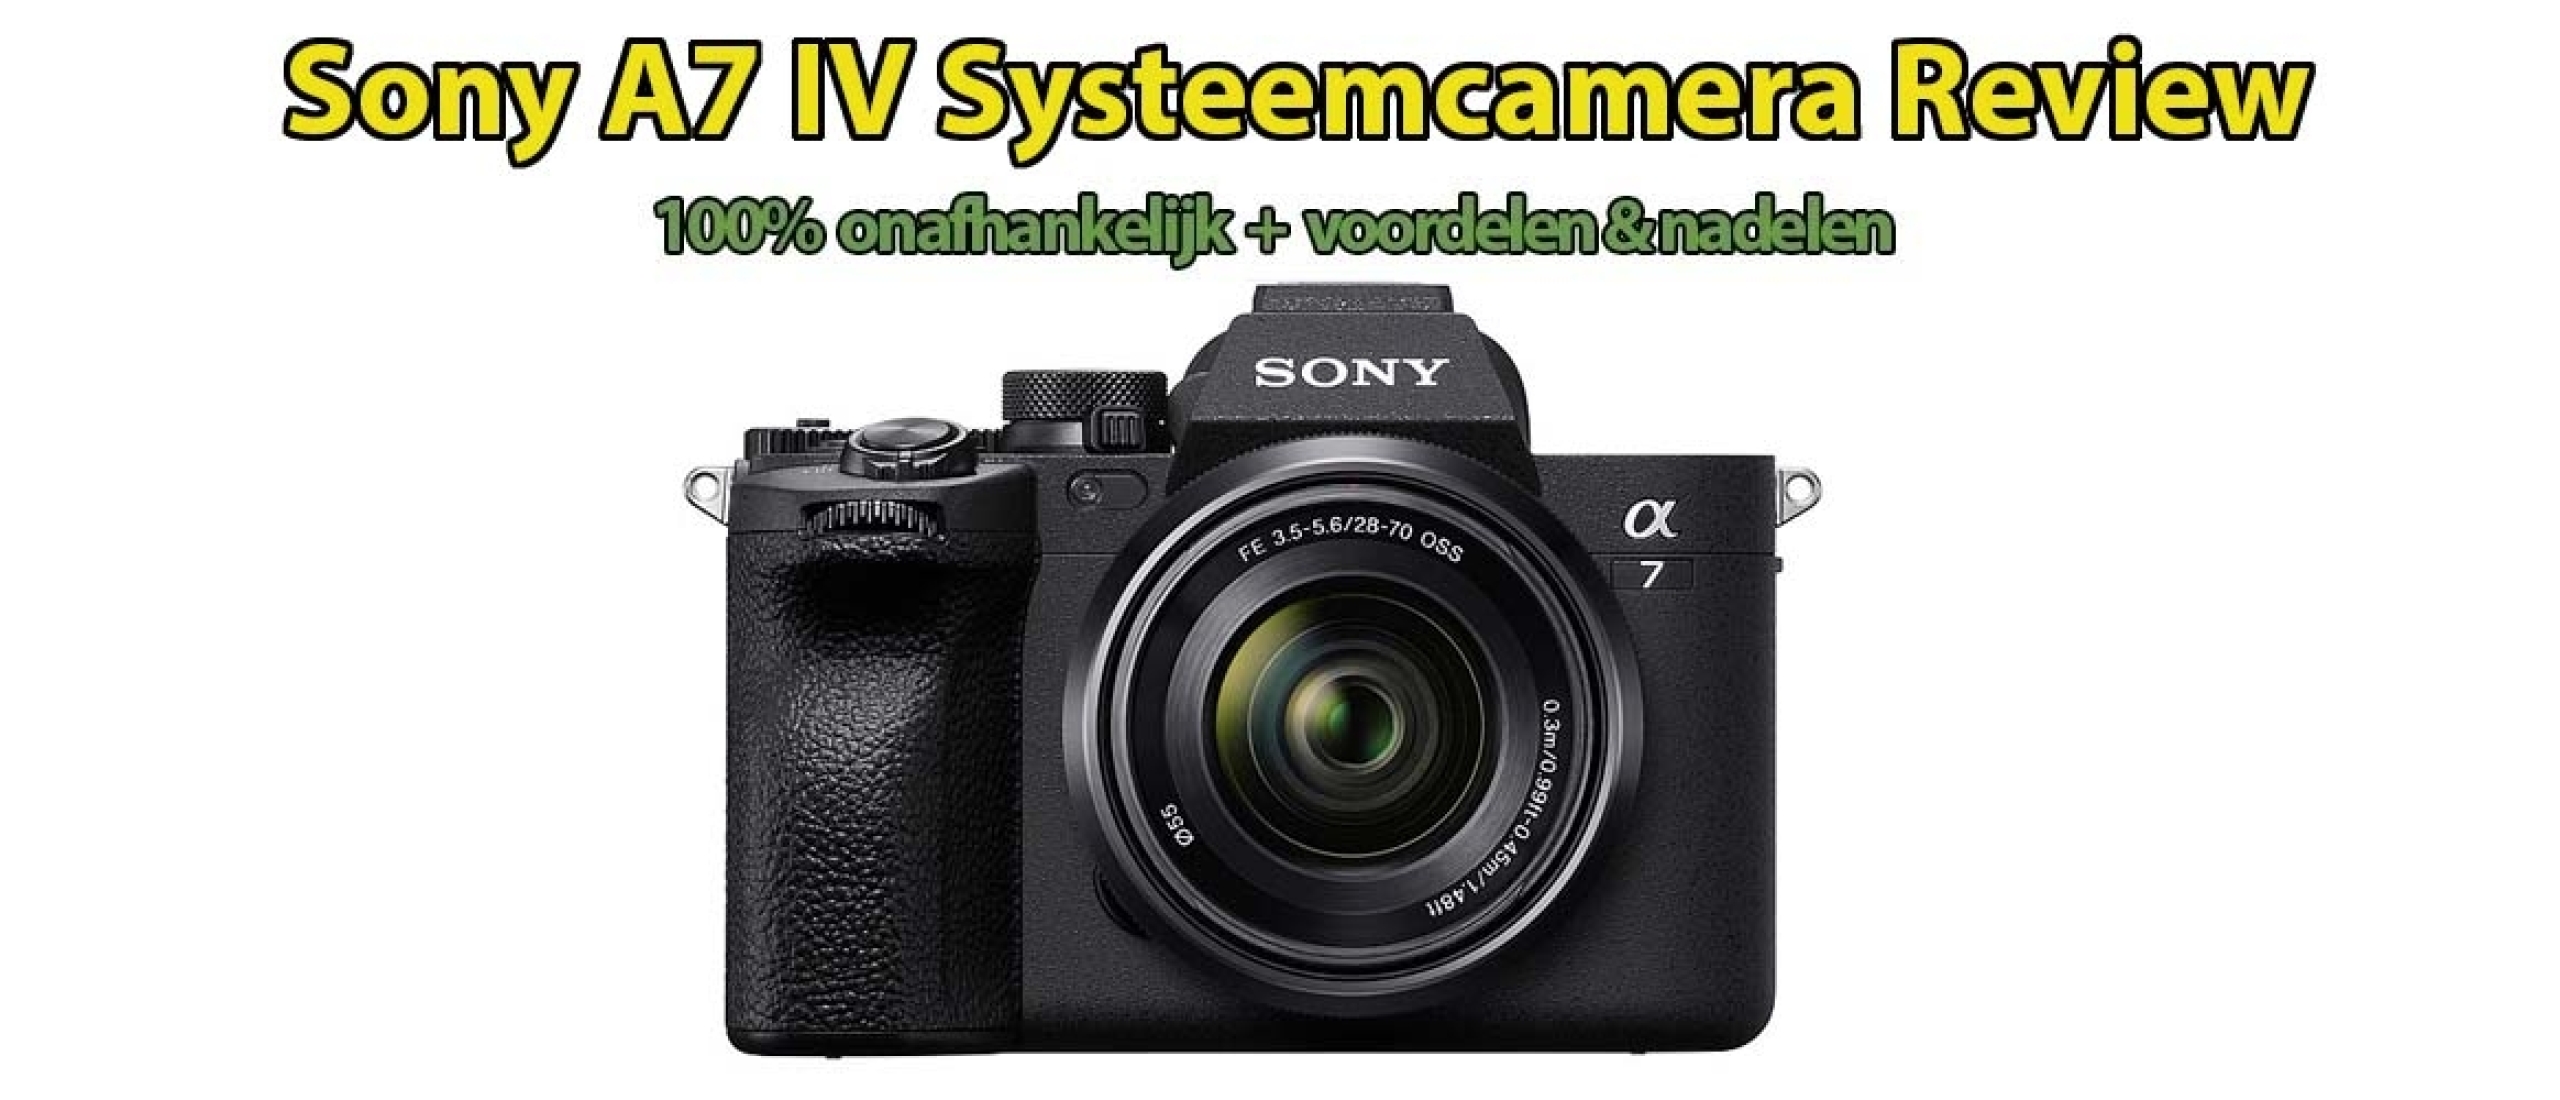 Sony A7 IV Systeemcamera Review